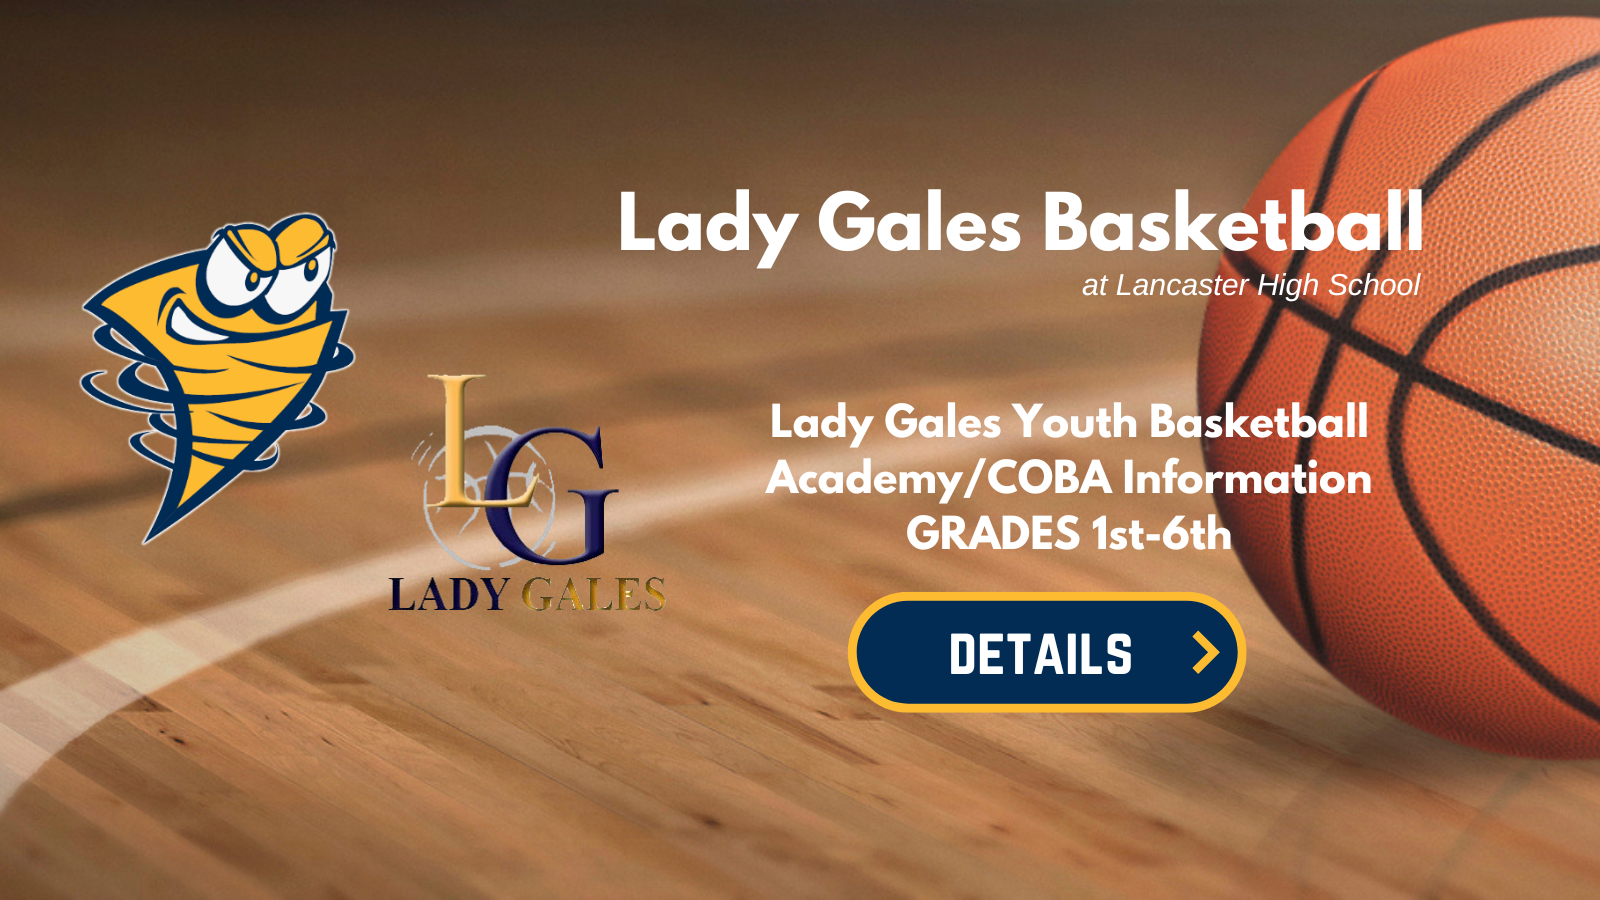 Lady Gales Youth Basketball Academy/COBA Information ad 